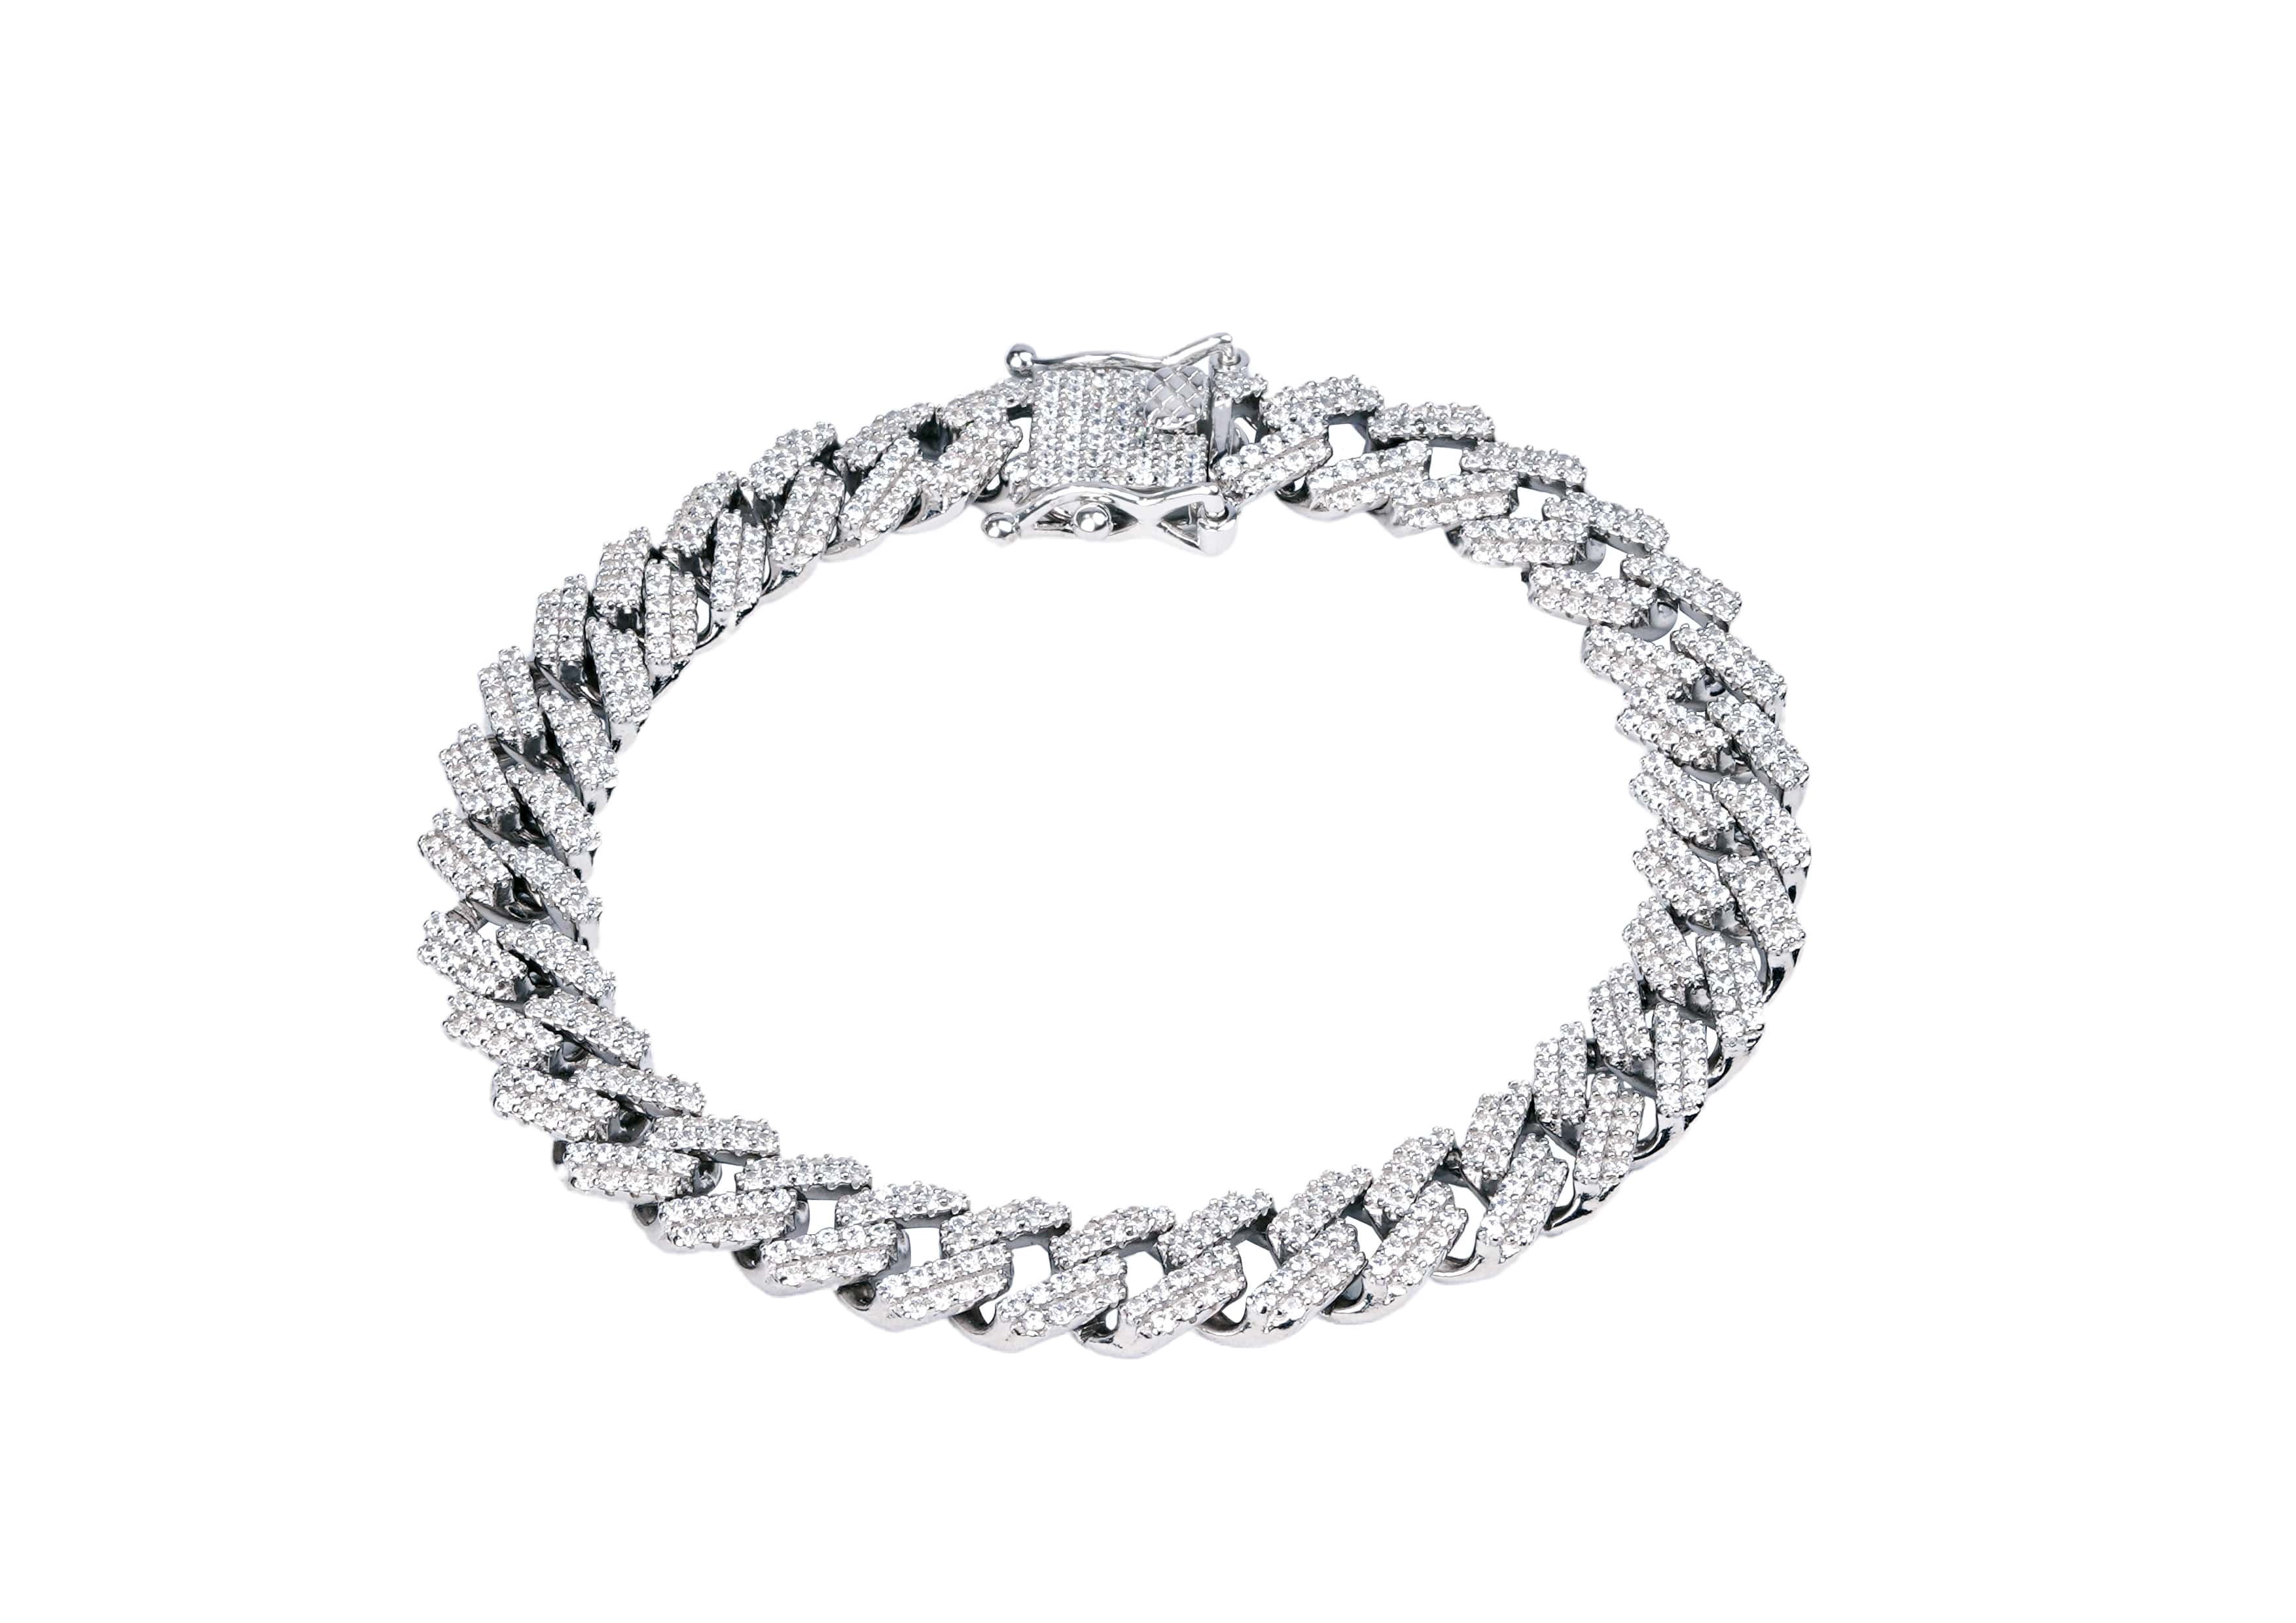 12mm Iced Out Gucci Link Bracelet – ICED OUT